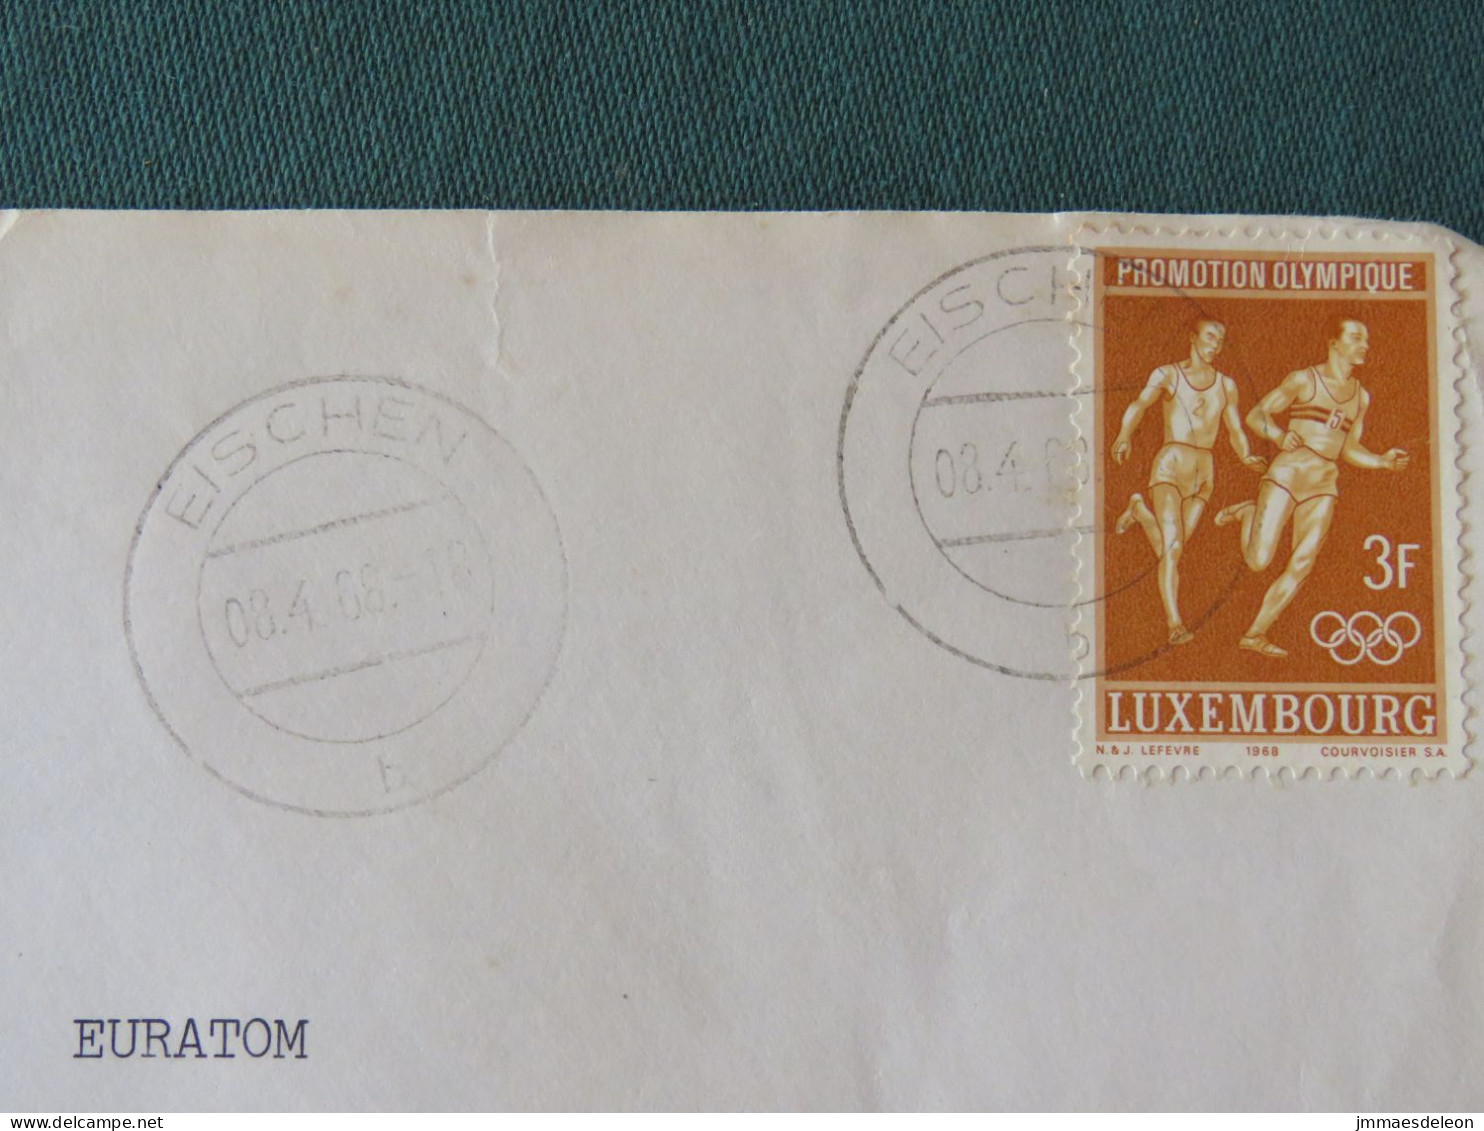 Luxembourg 1968 Cover To Belgium - Olympic Games Running - Briefe U. Dokumente